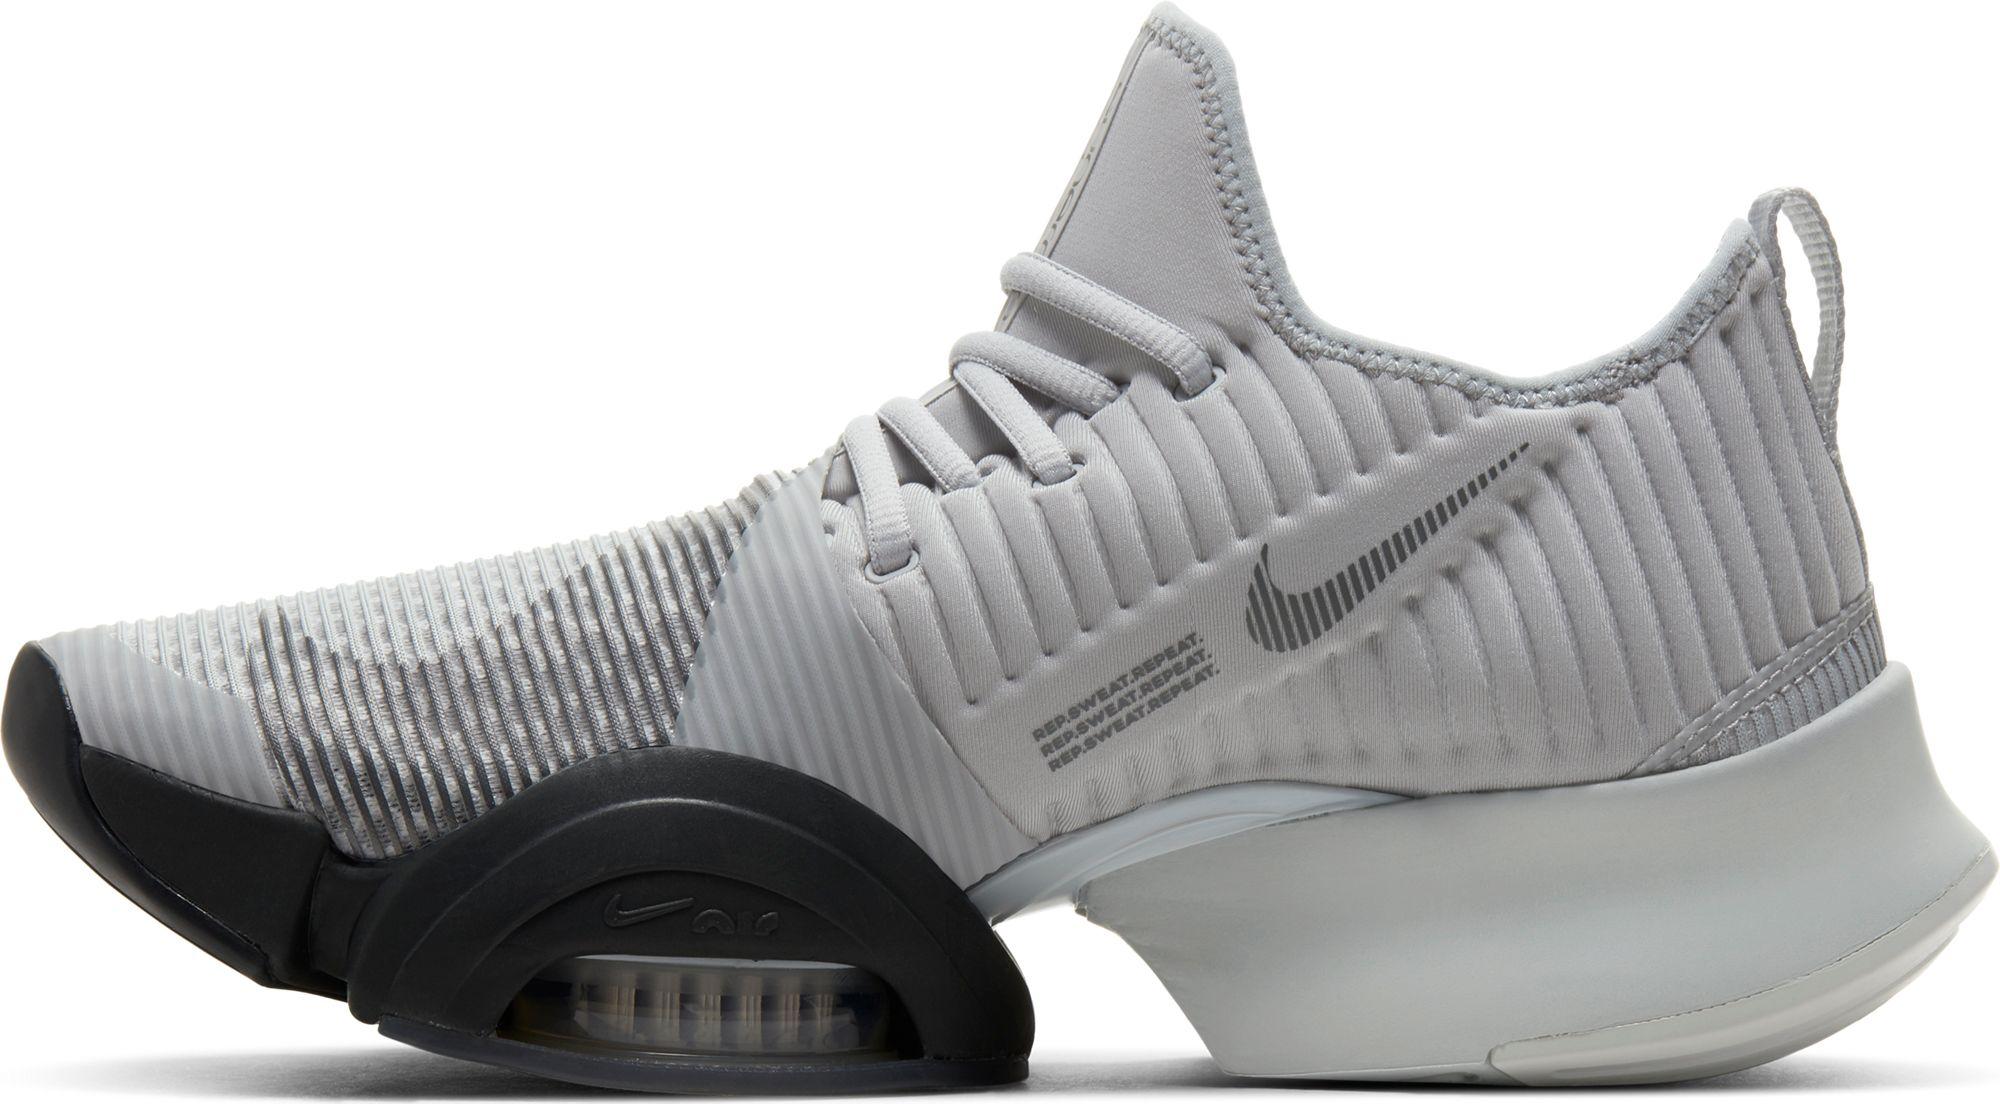 Nike Rubber Air Zoom Superrep Training Shoes in Grey/Black (Gray 